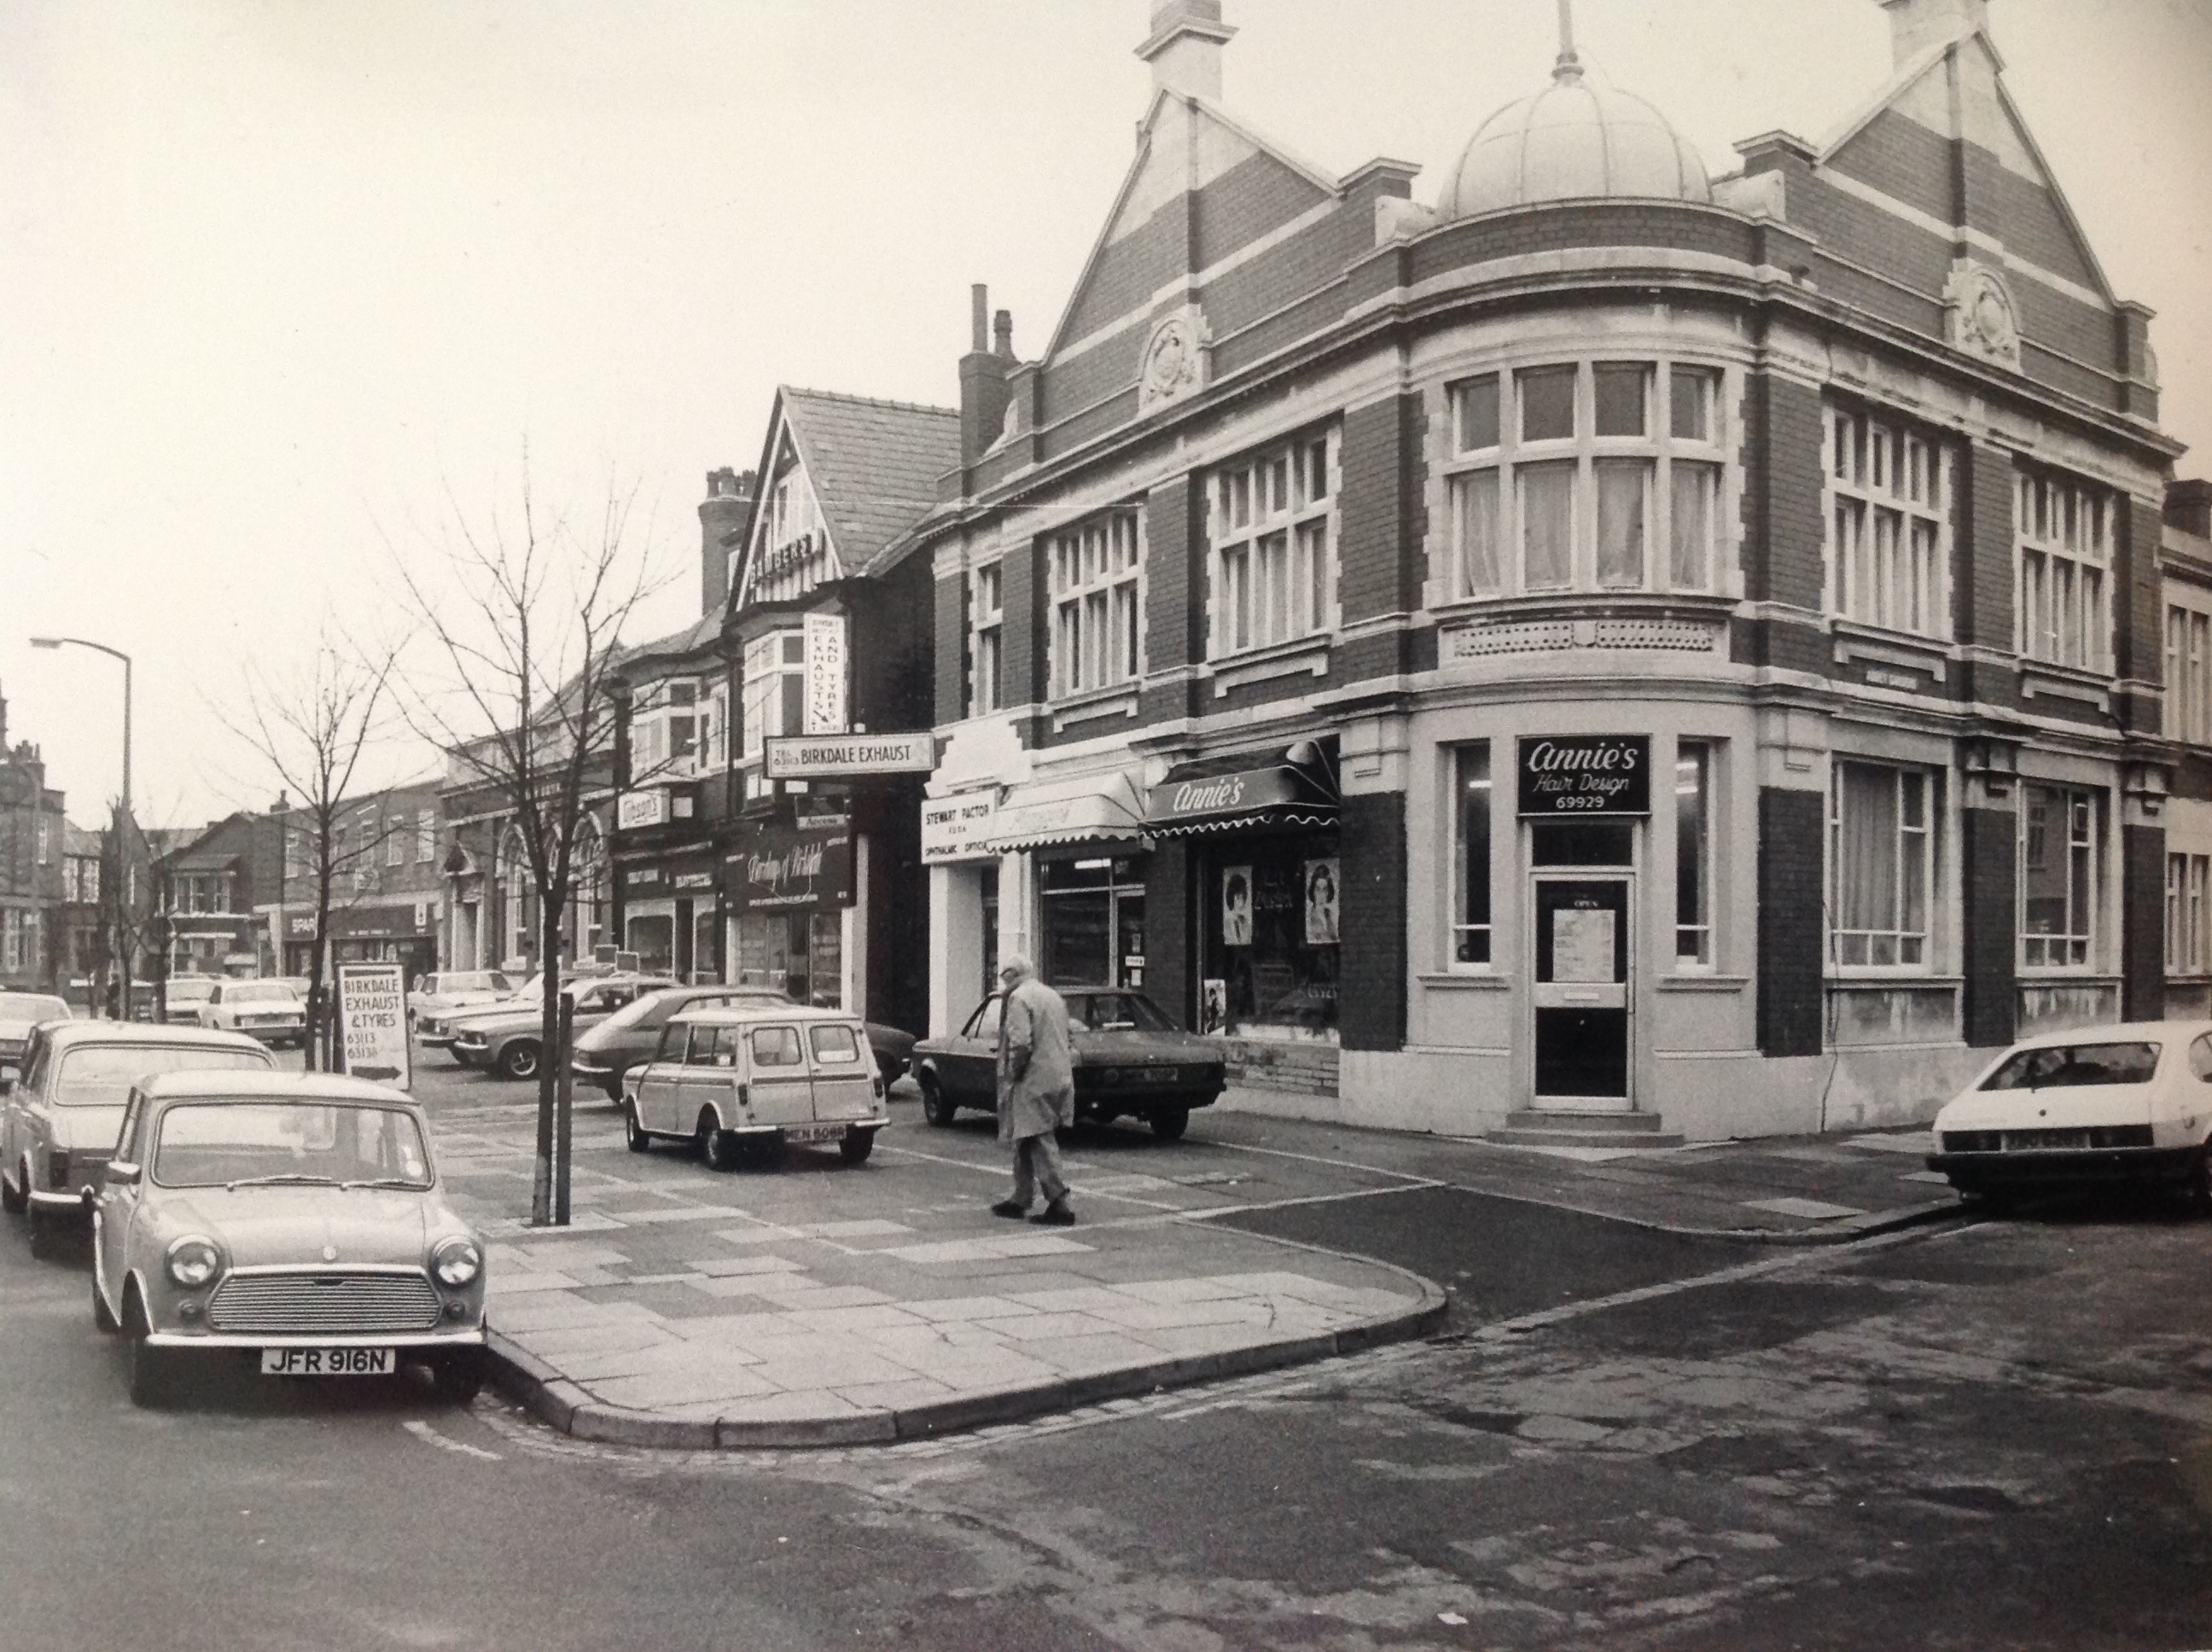 Birkdale Village in the 1980s. Birkdale in February, 1984, with businesses including Annie's Hair Design, Birkdale Exhaust & Tyres and Stewart Pactor Opticians.